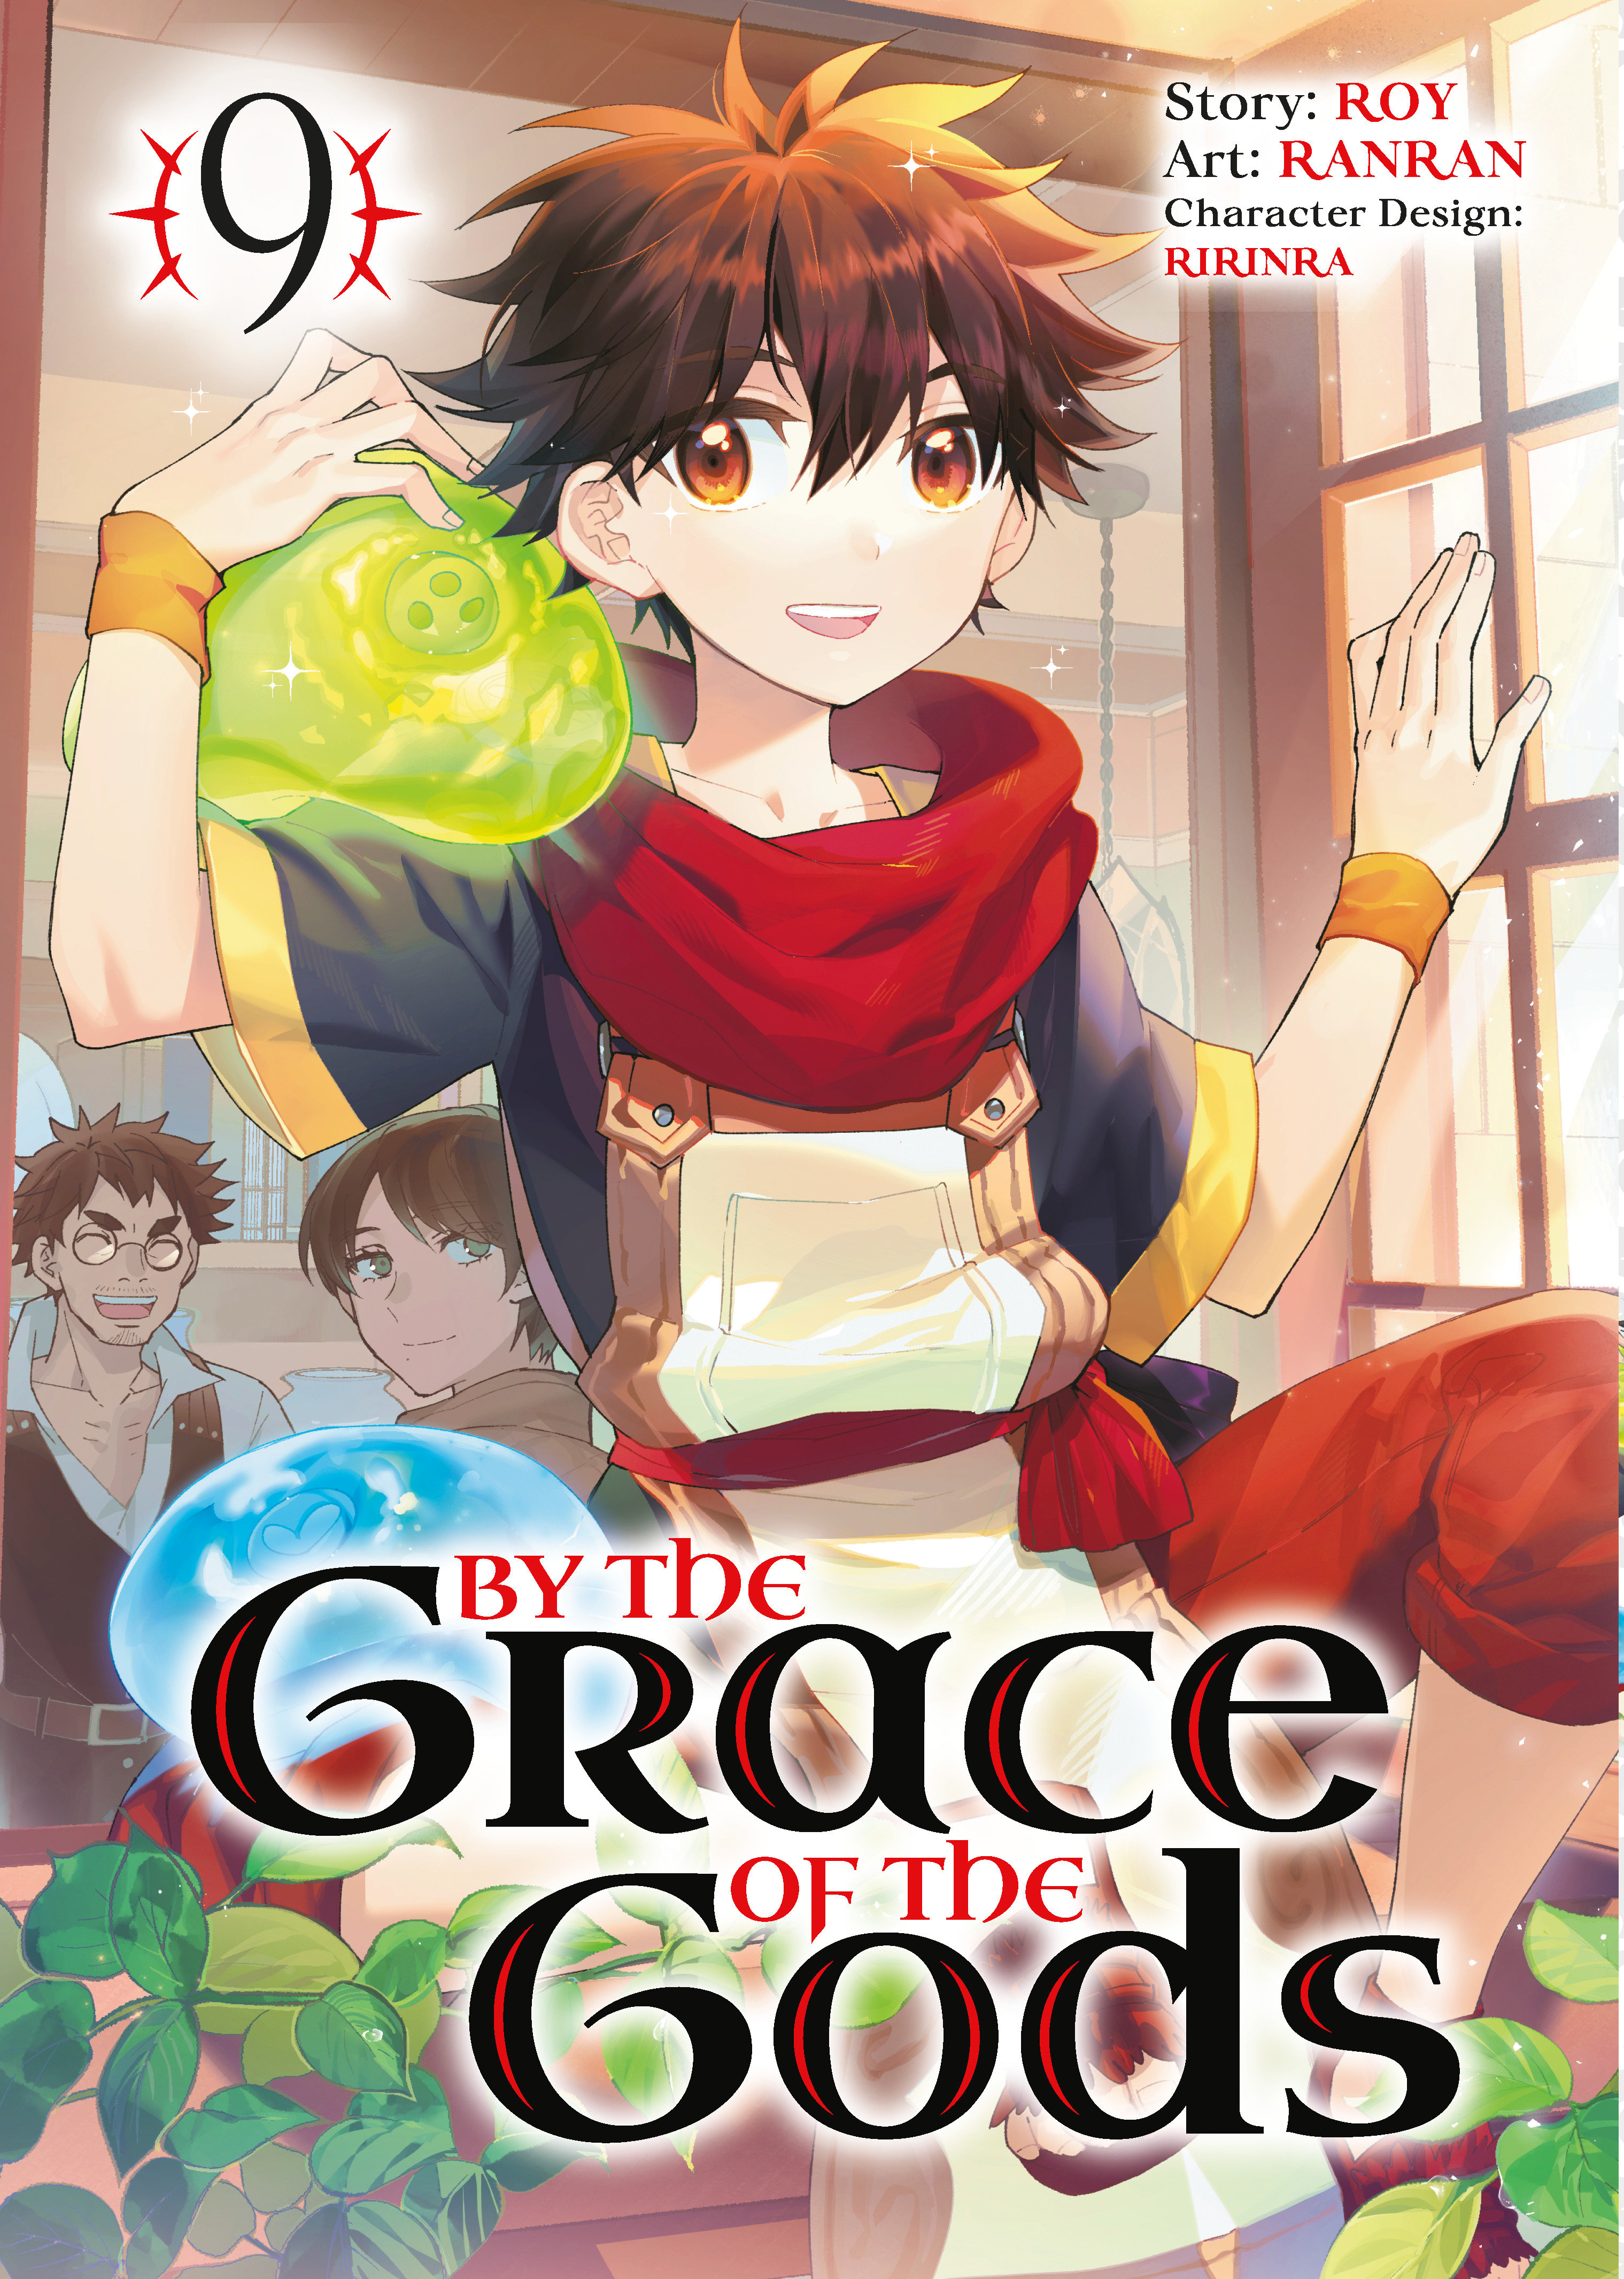 By the Grace of the Gods Manga Volume 9